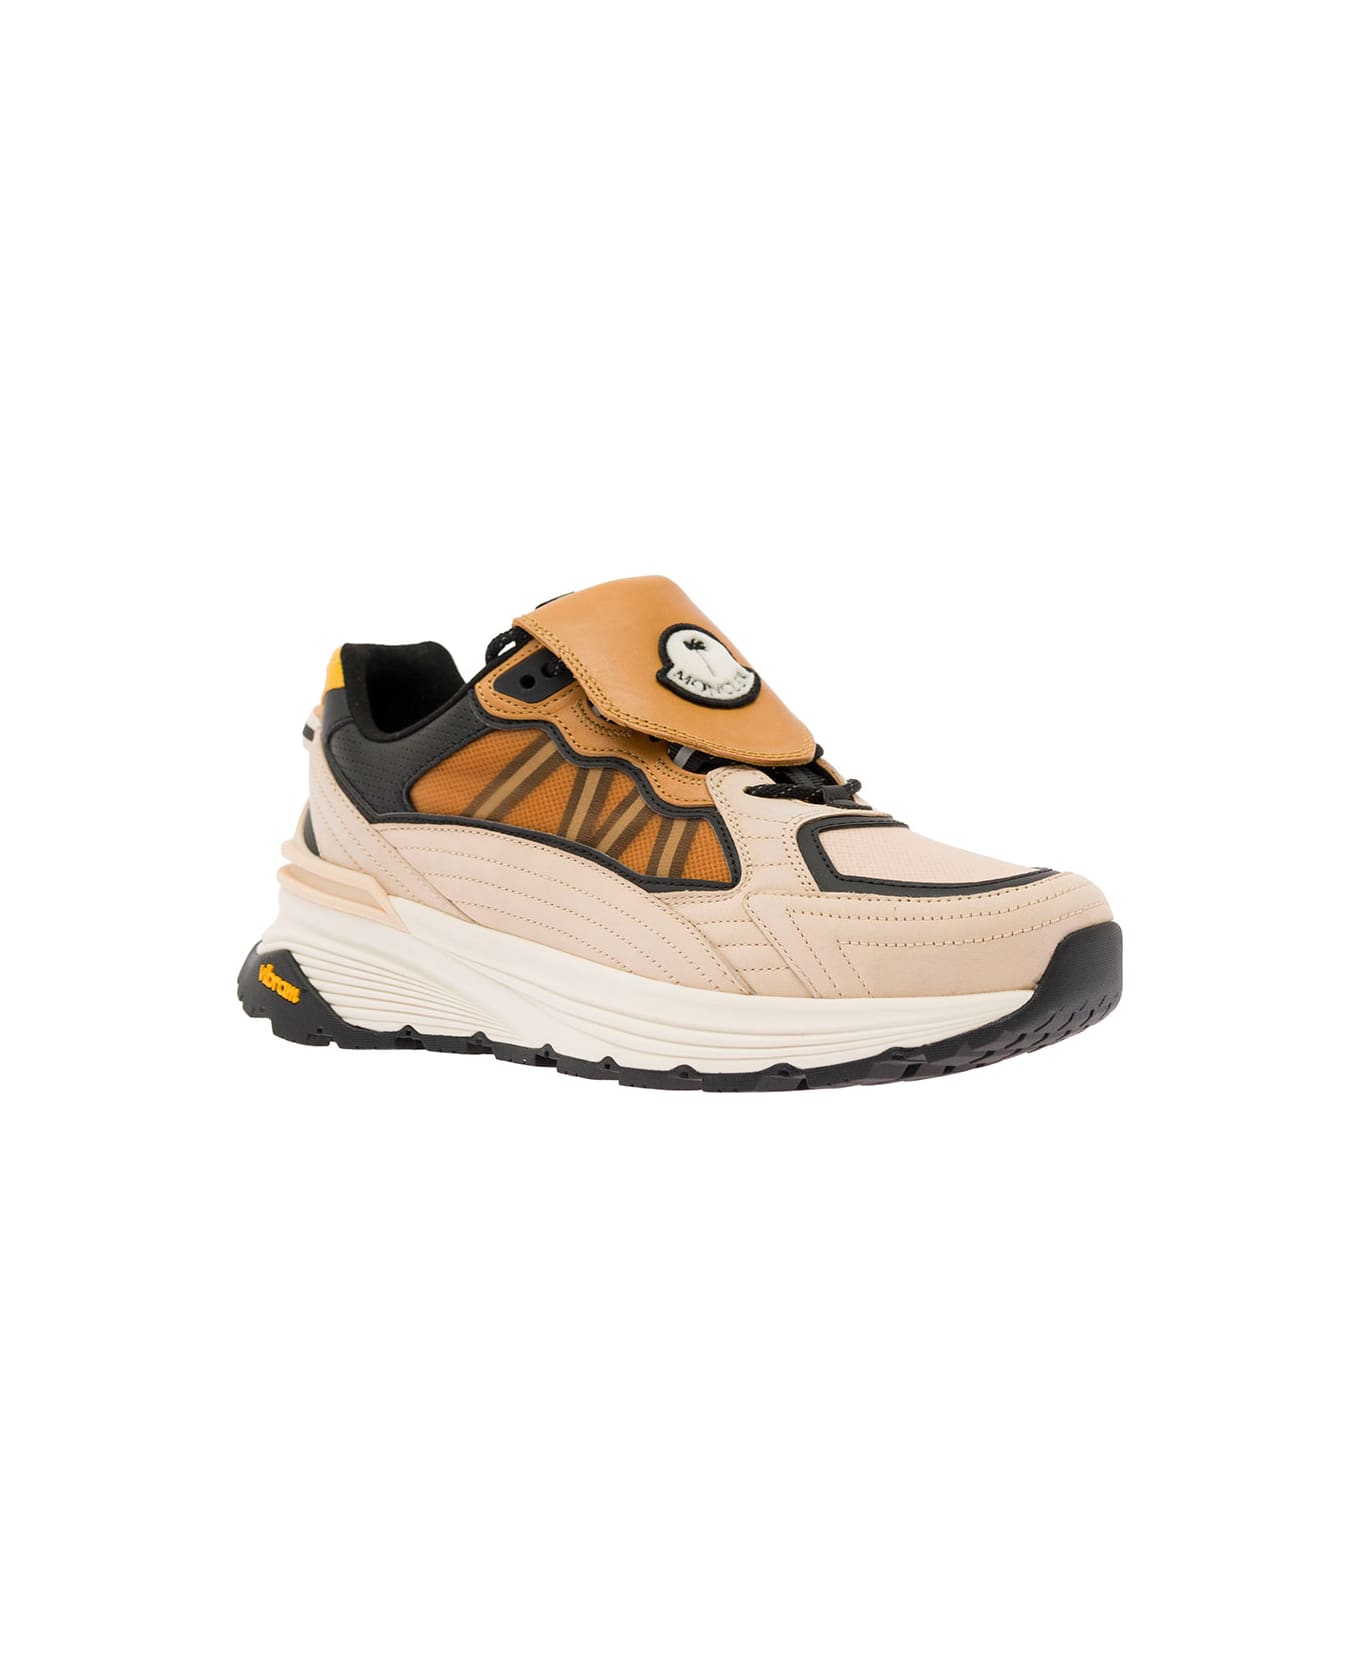 Moncler X Palm Angels 'runner Palm Lite Runner' Multicolor Low Top Sneakers With Patch Logo In Leather And Ripstop Man 8 Moncler Palm Angels - Multicolor